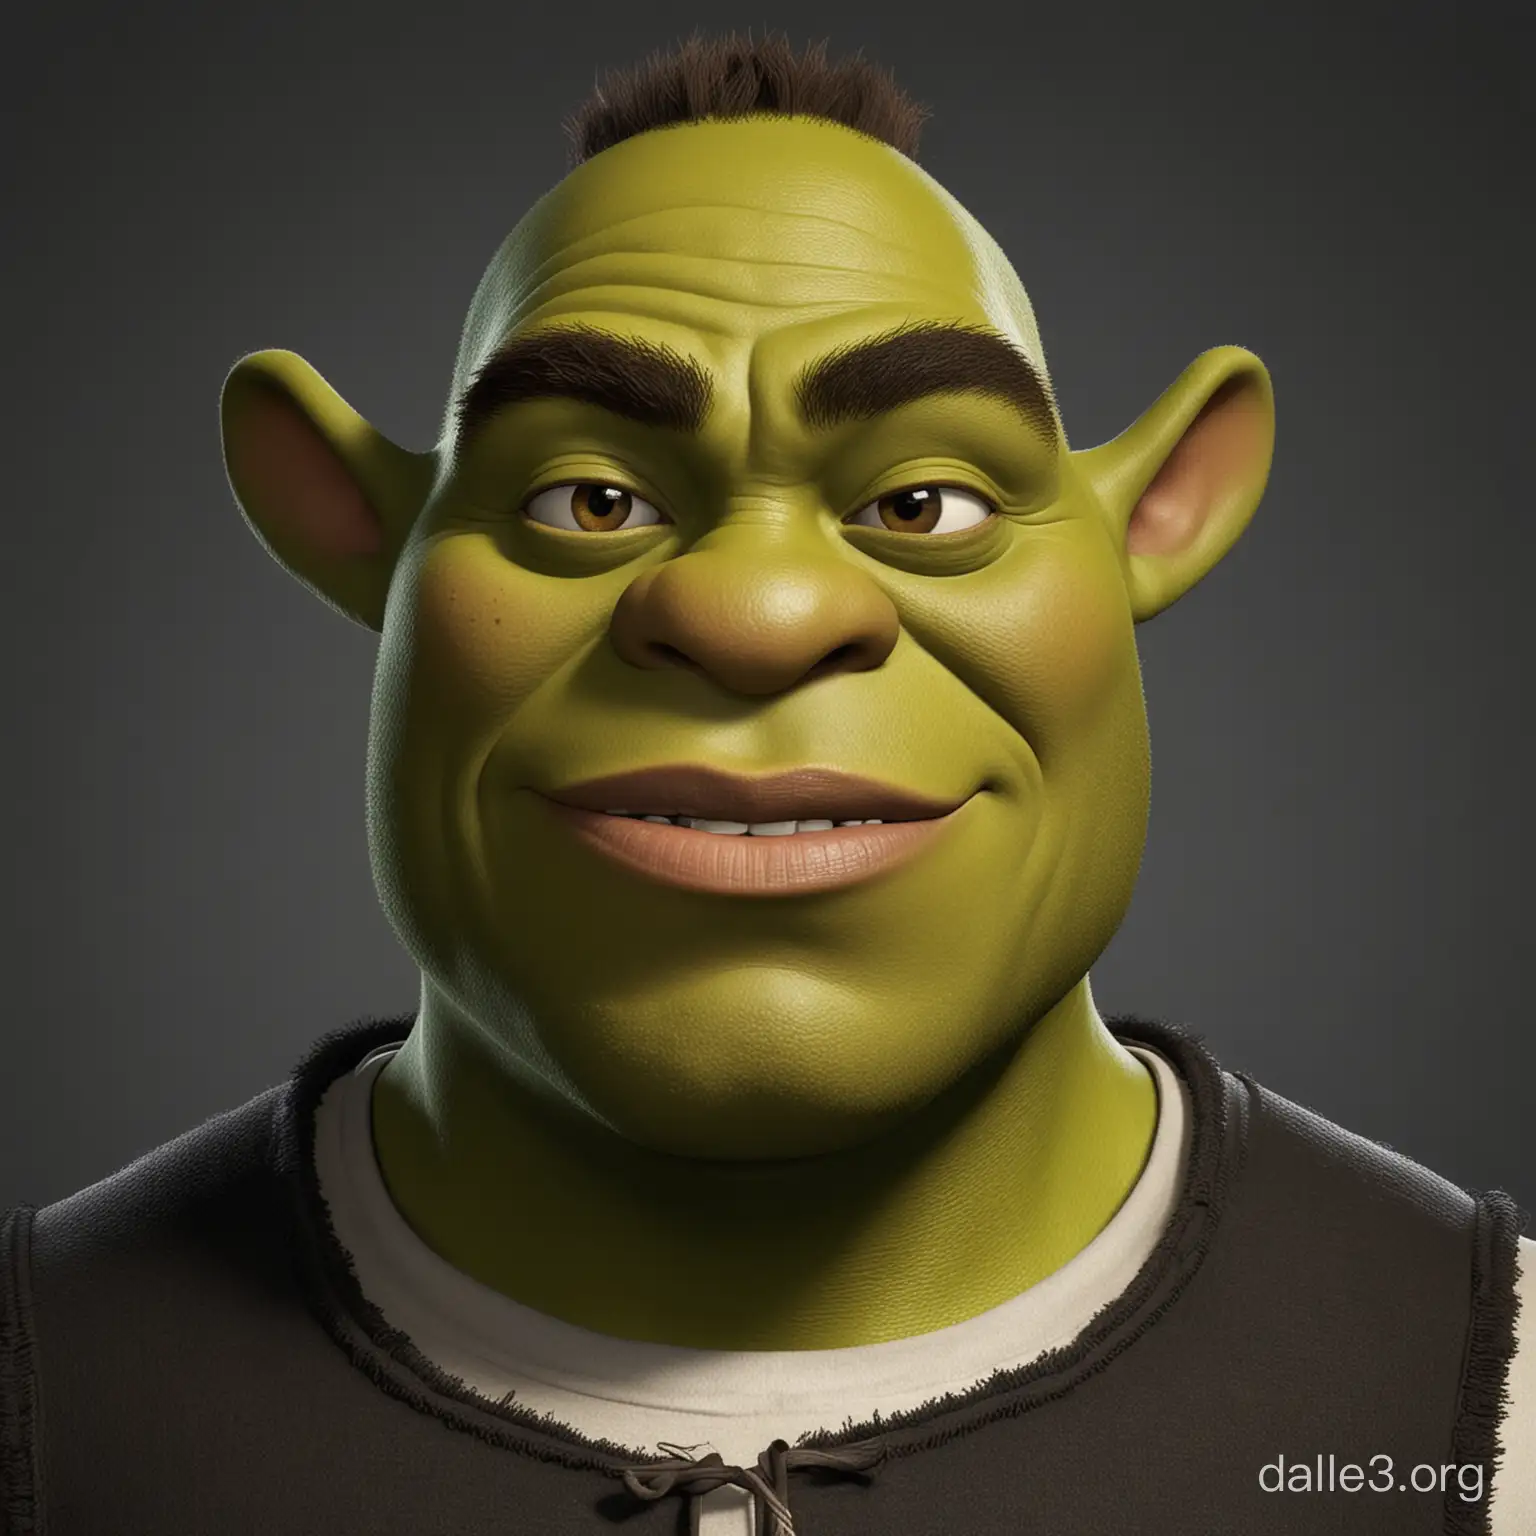 create a black in the animation style of the shrek movies